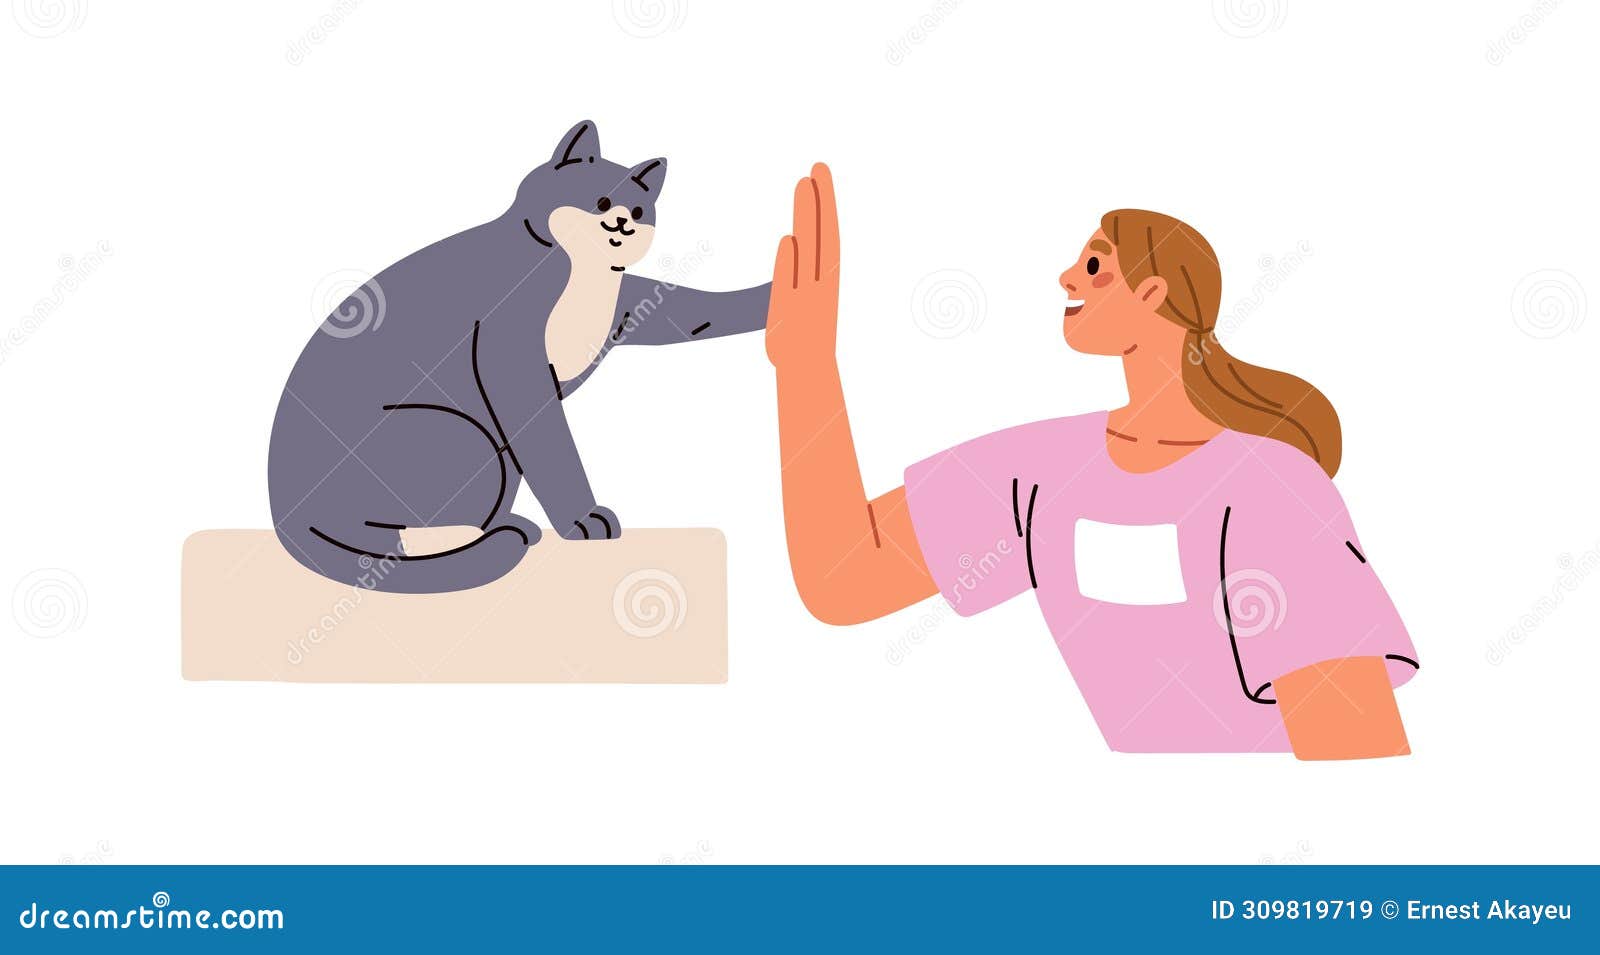 human giving high five to cute cat. smart feline animal greeting owner, clapping paw on hand, hi gesture. pet